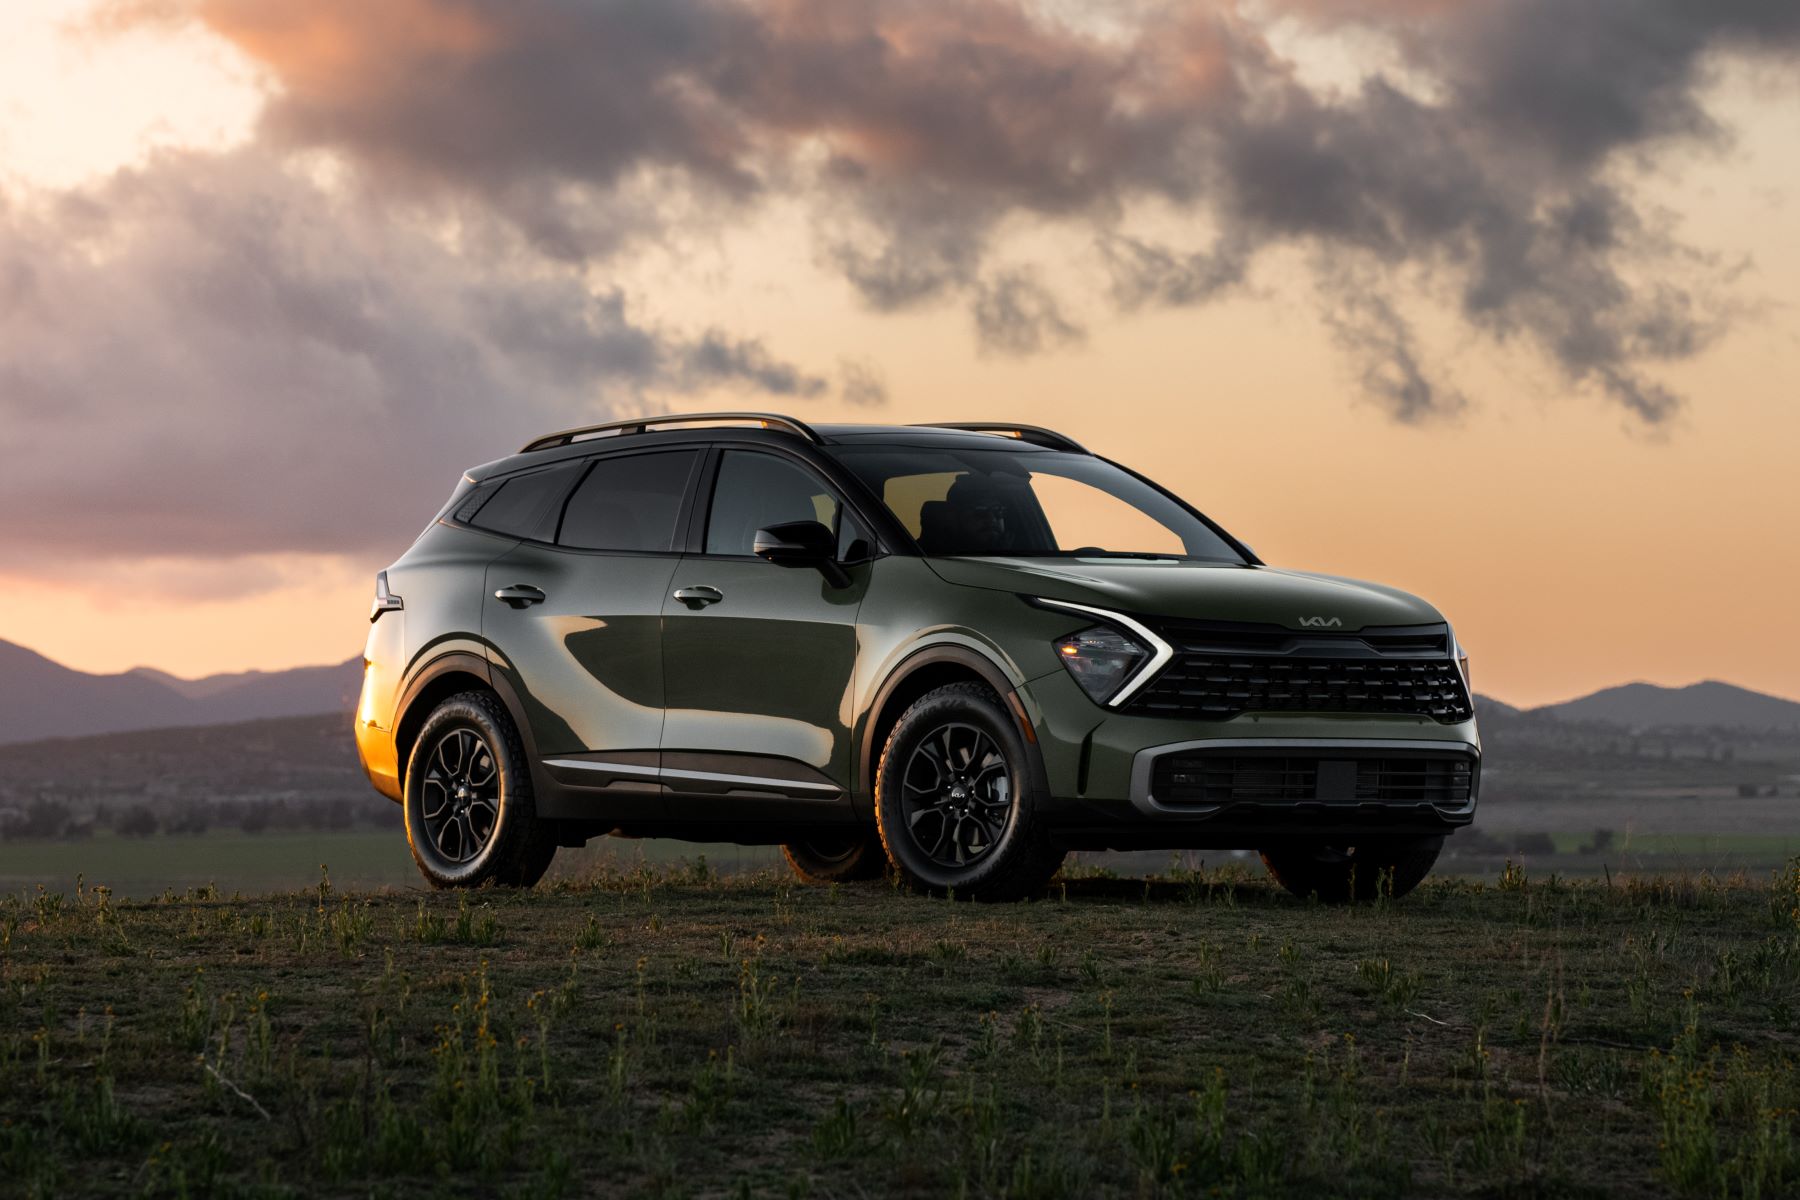 The redesigned 2023 Kia Sportage X-Pro compact SUV parked on an empty field under a orange sunset sky